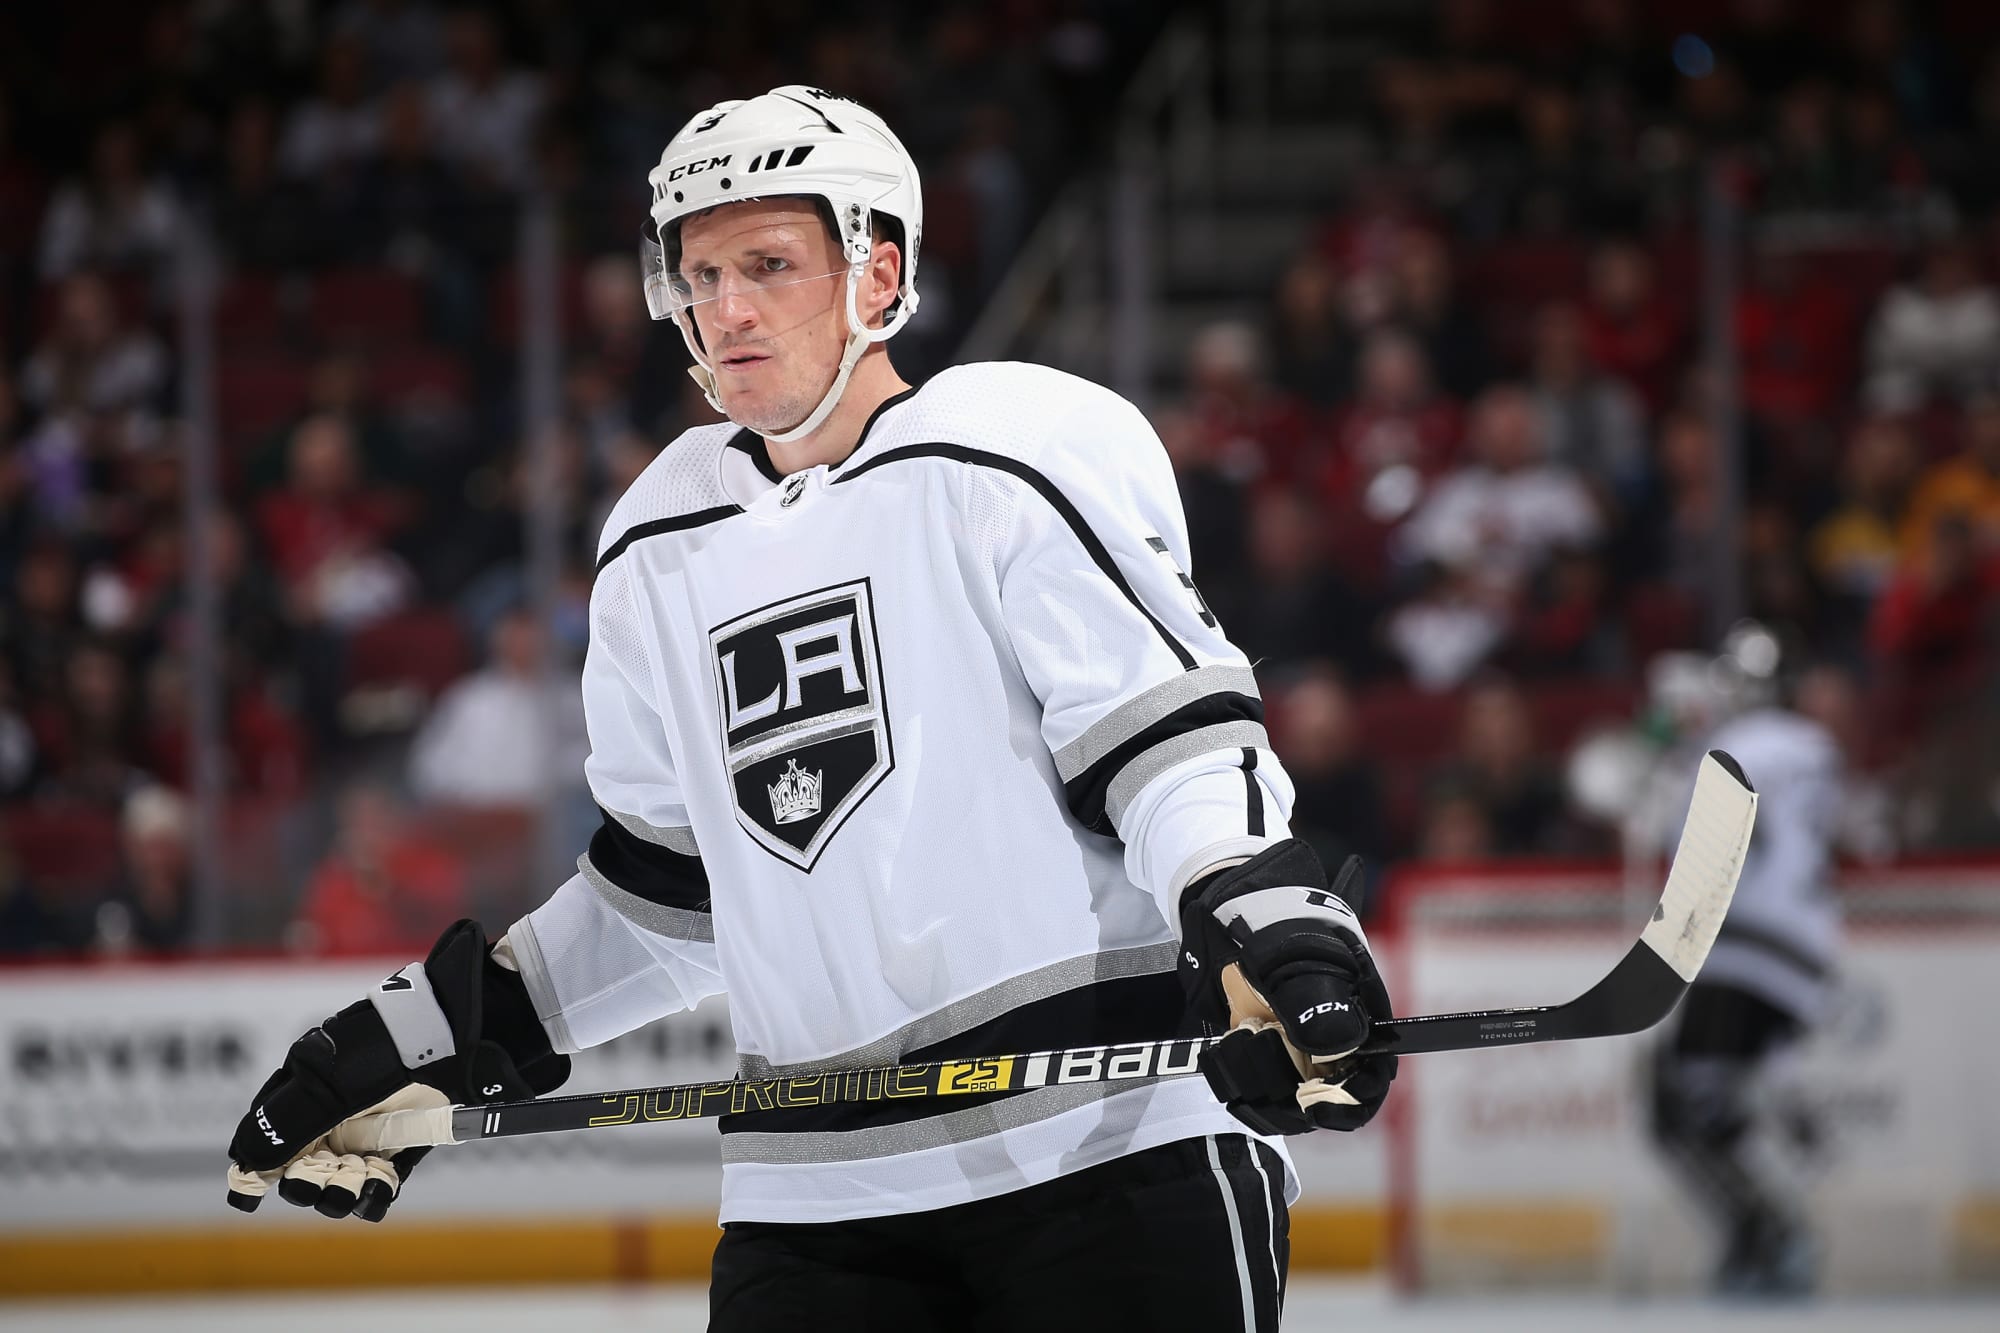 LA Kings on X: Congratulations to our friend Dion Phaneuf on his  retirement. Dion celebrated his 1000th career @NHL game with the LA Kings,  where he always represented our hockey club with